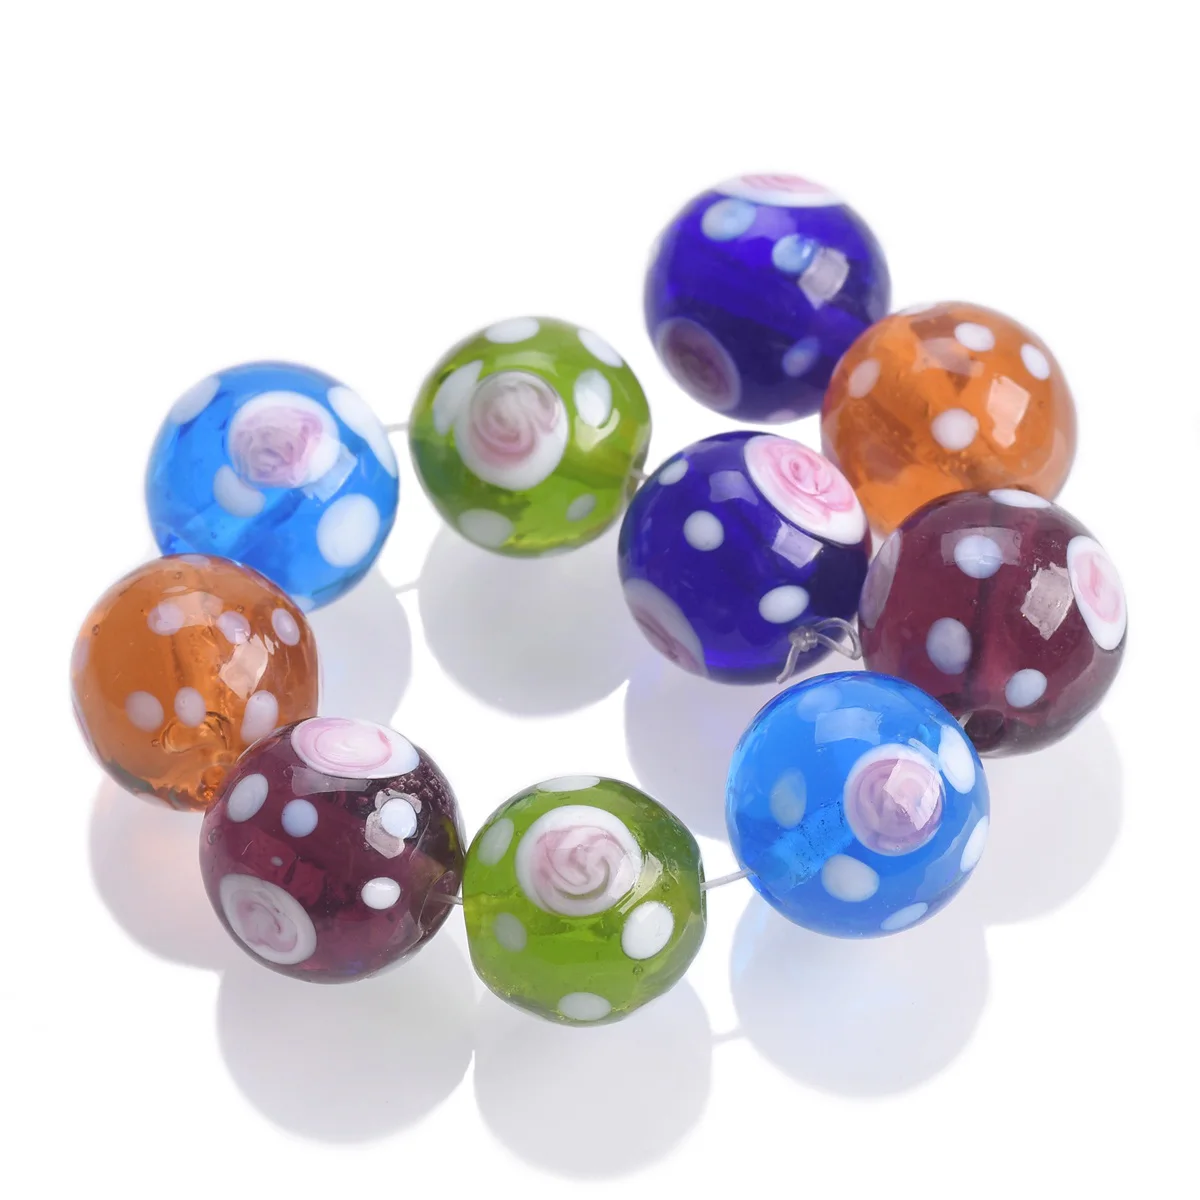 5pcs Round 14mm Spots Pattern Handmade Lampwork Glass Loose Beads for Jewelry Making DIY Crafts Findings